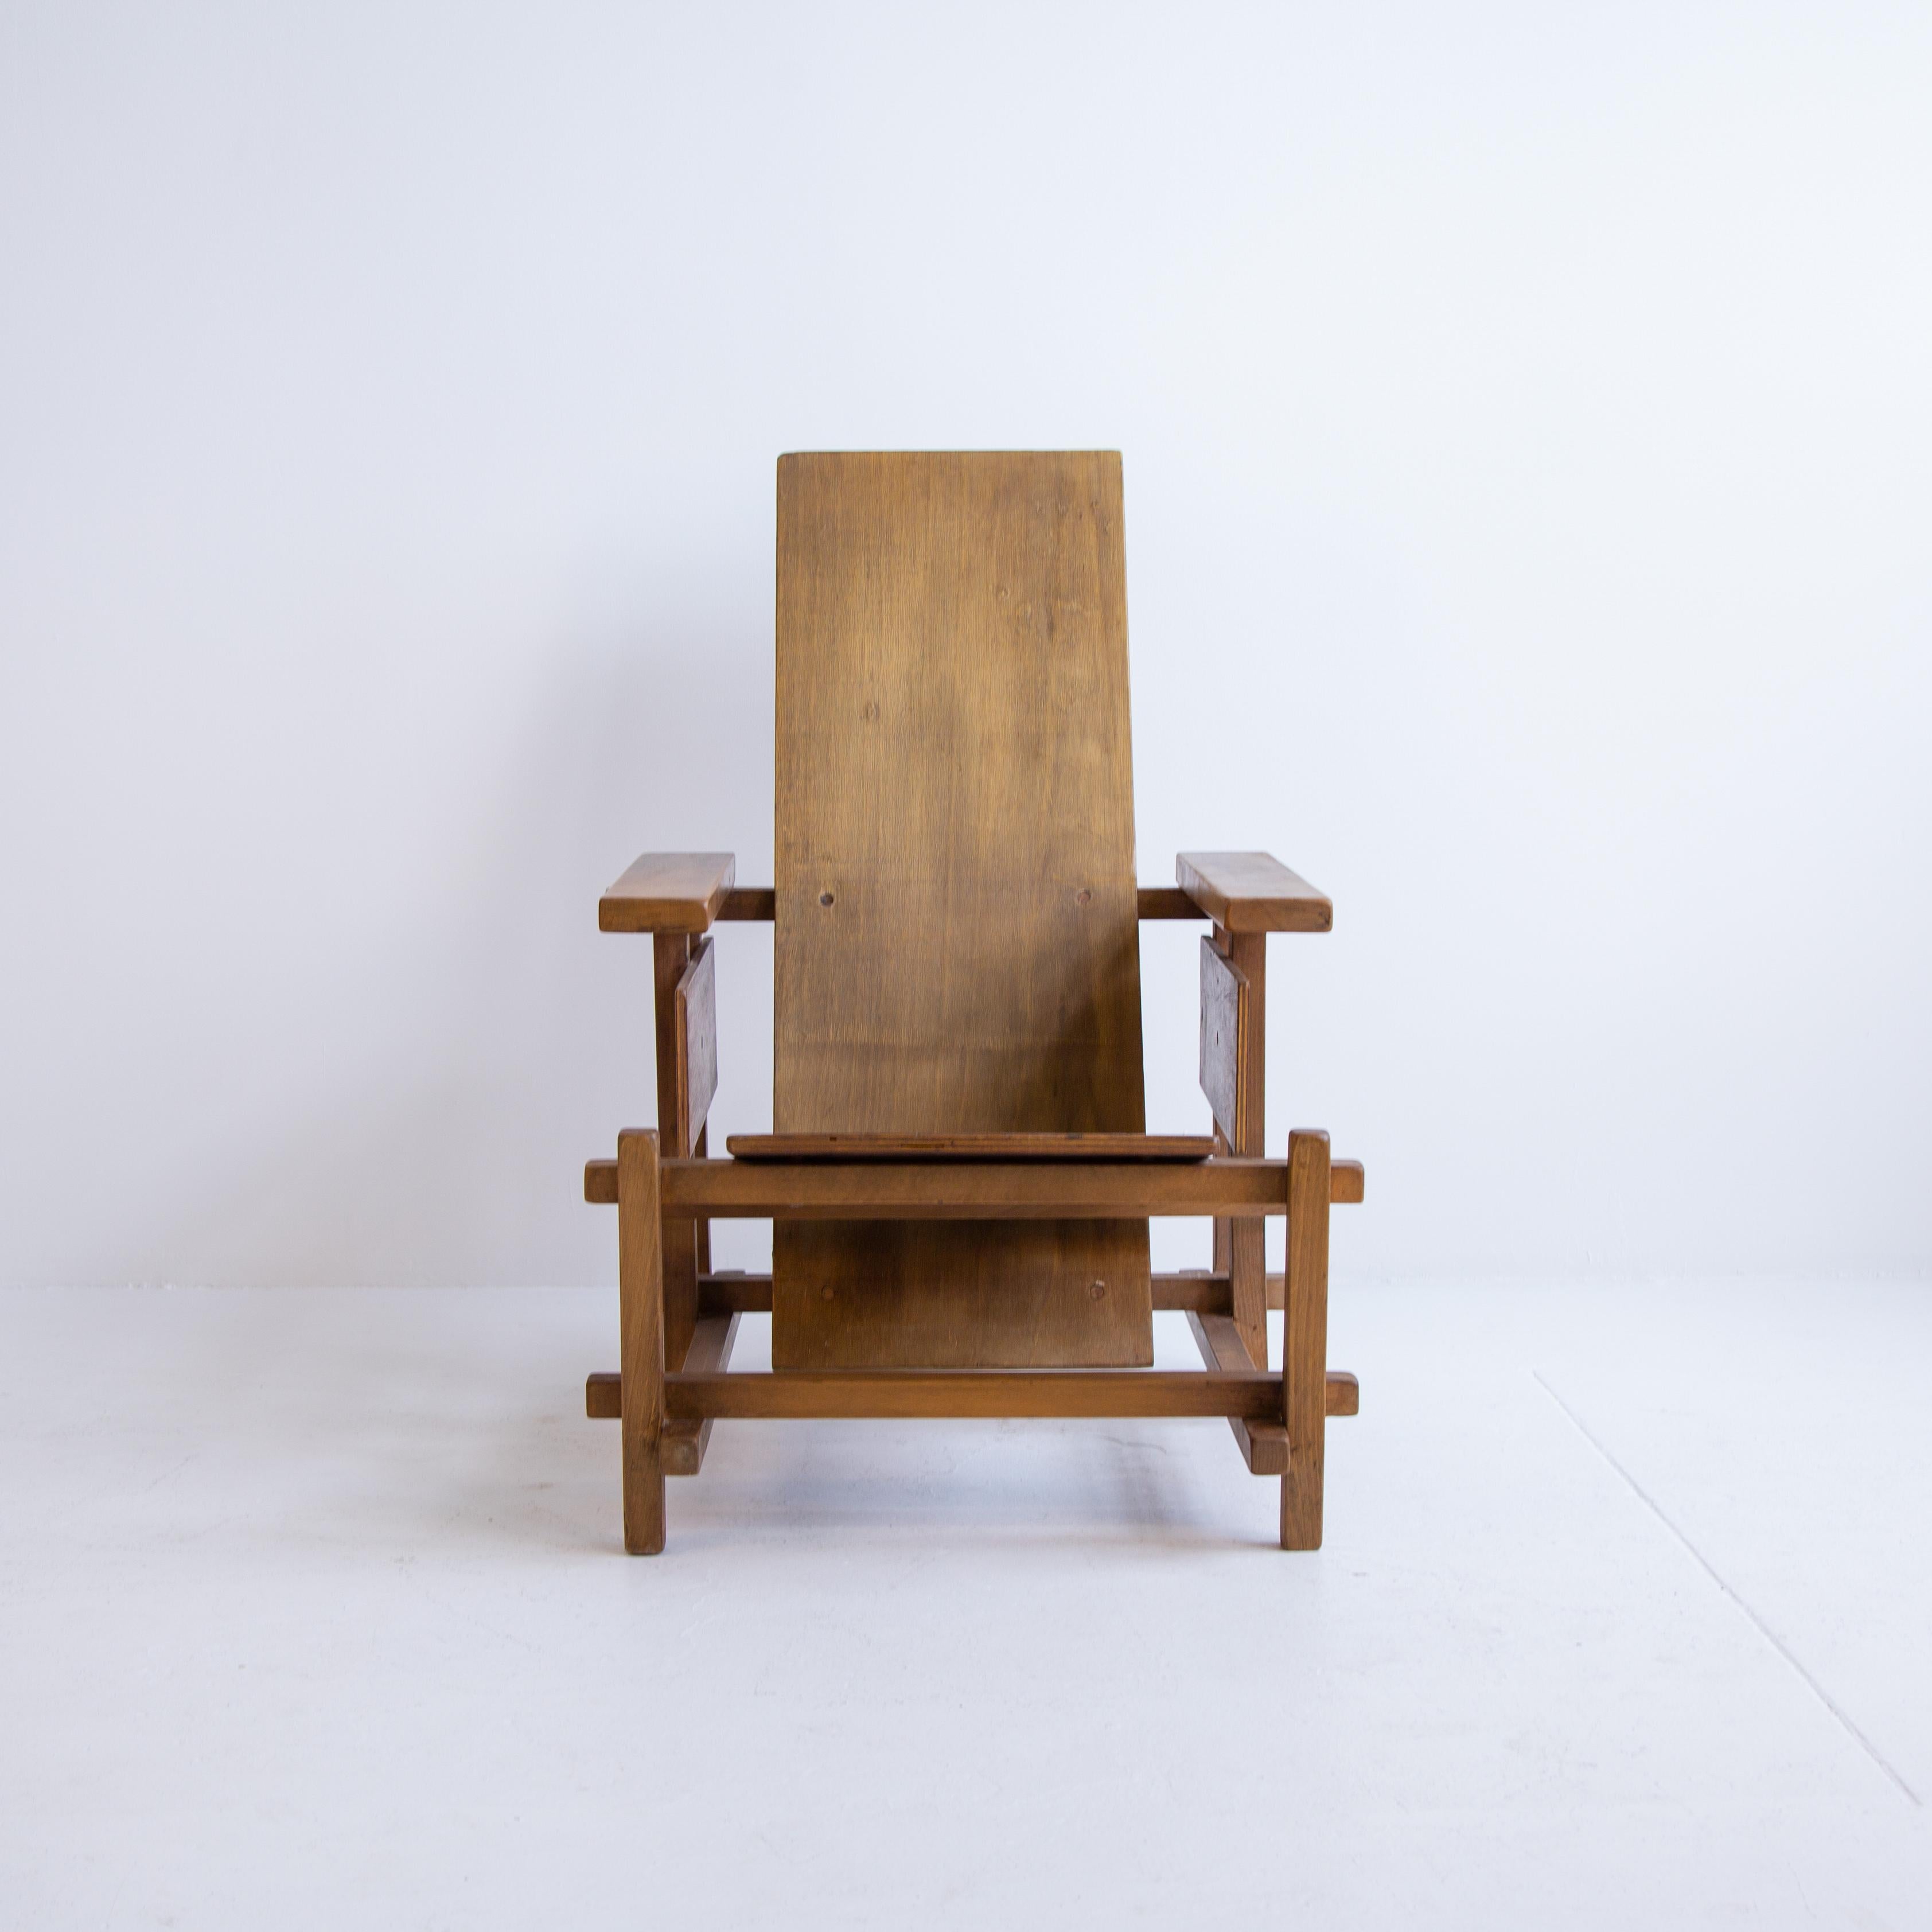 Rare prototype of the iconic red and blue chair designed in 1932 by Gerrit Rietveld. Chair has a unique stained woodwork with a slatted seat for back comfort. This chair exudes tons of character with great patina that would be perfect as an